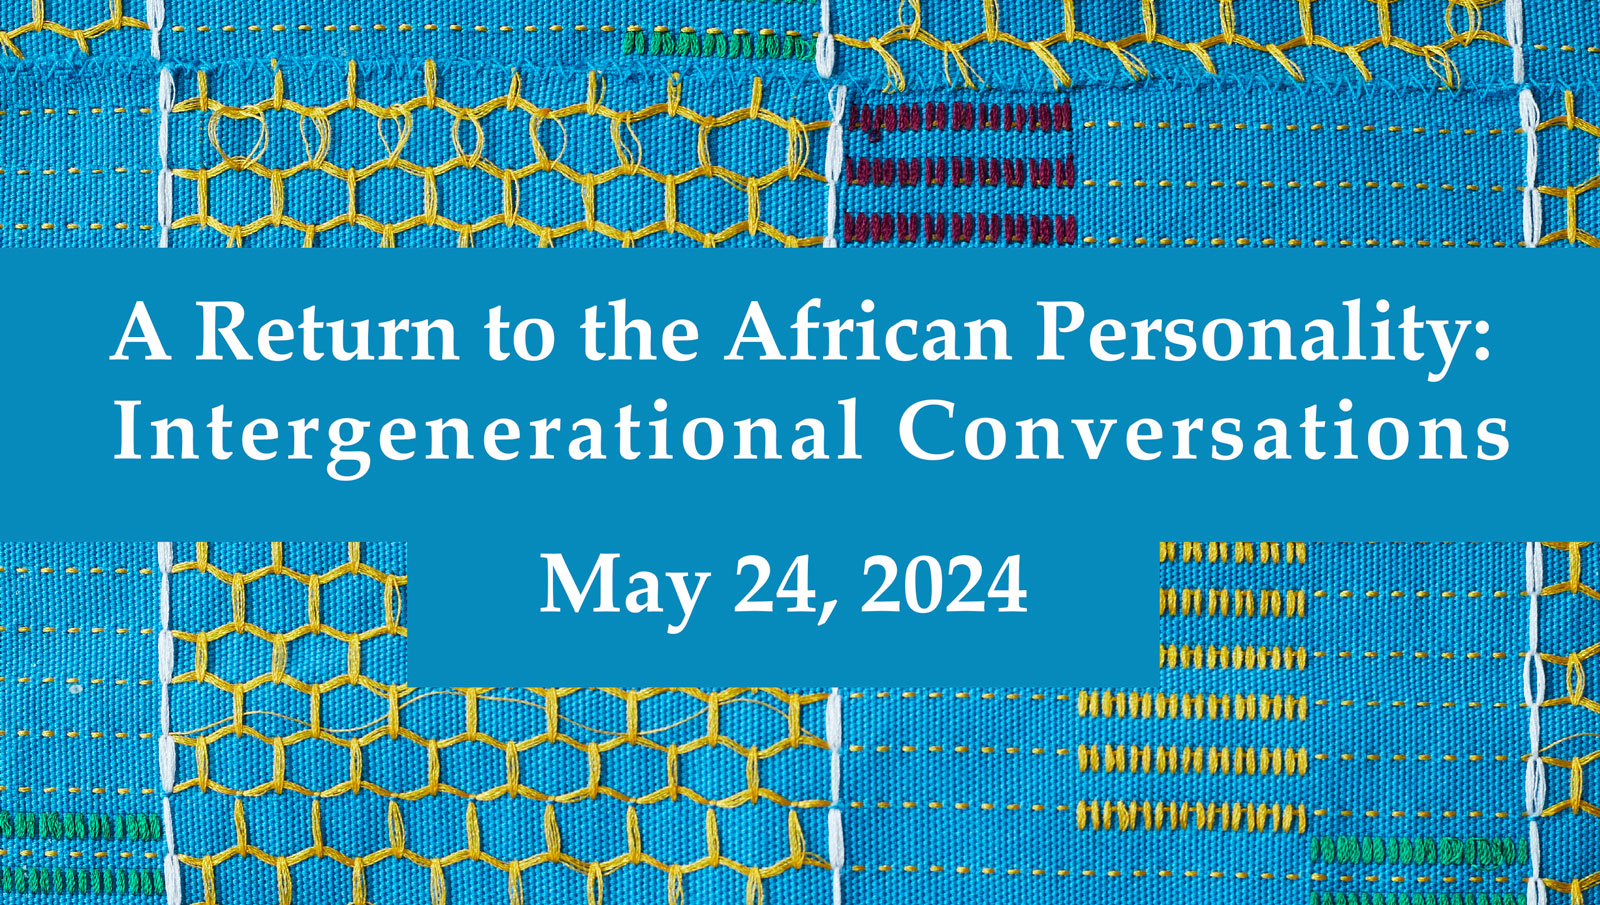 A Return to the African Personality: Intergenerational Conversations